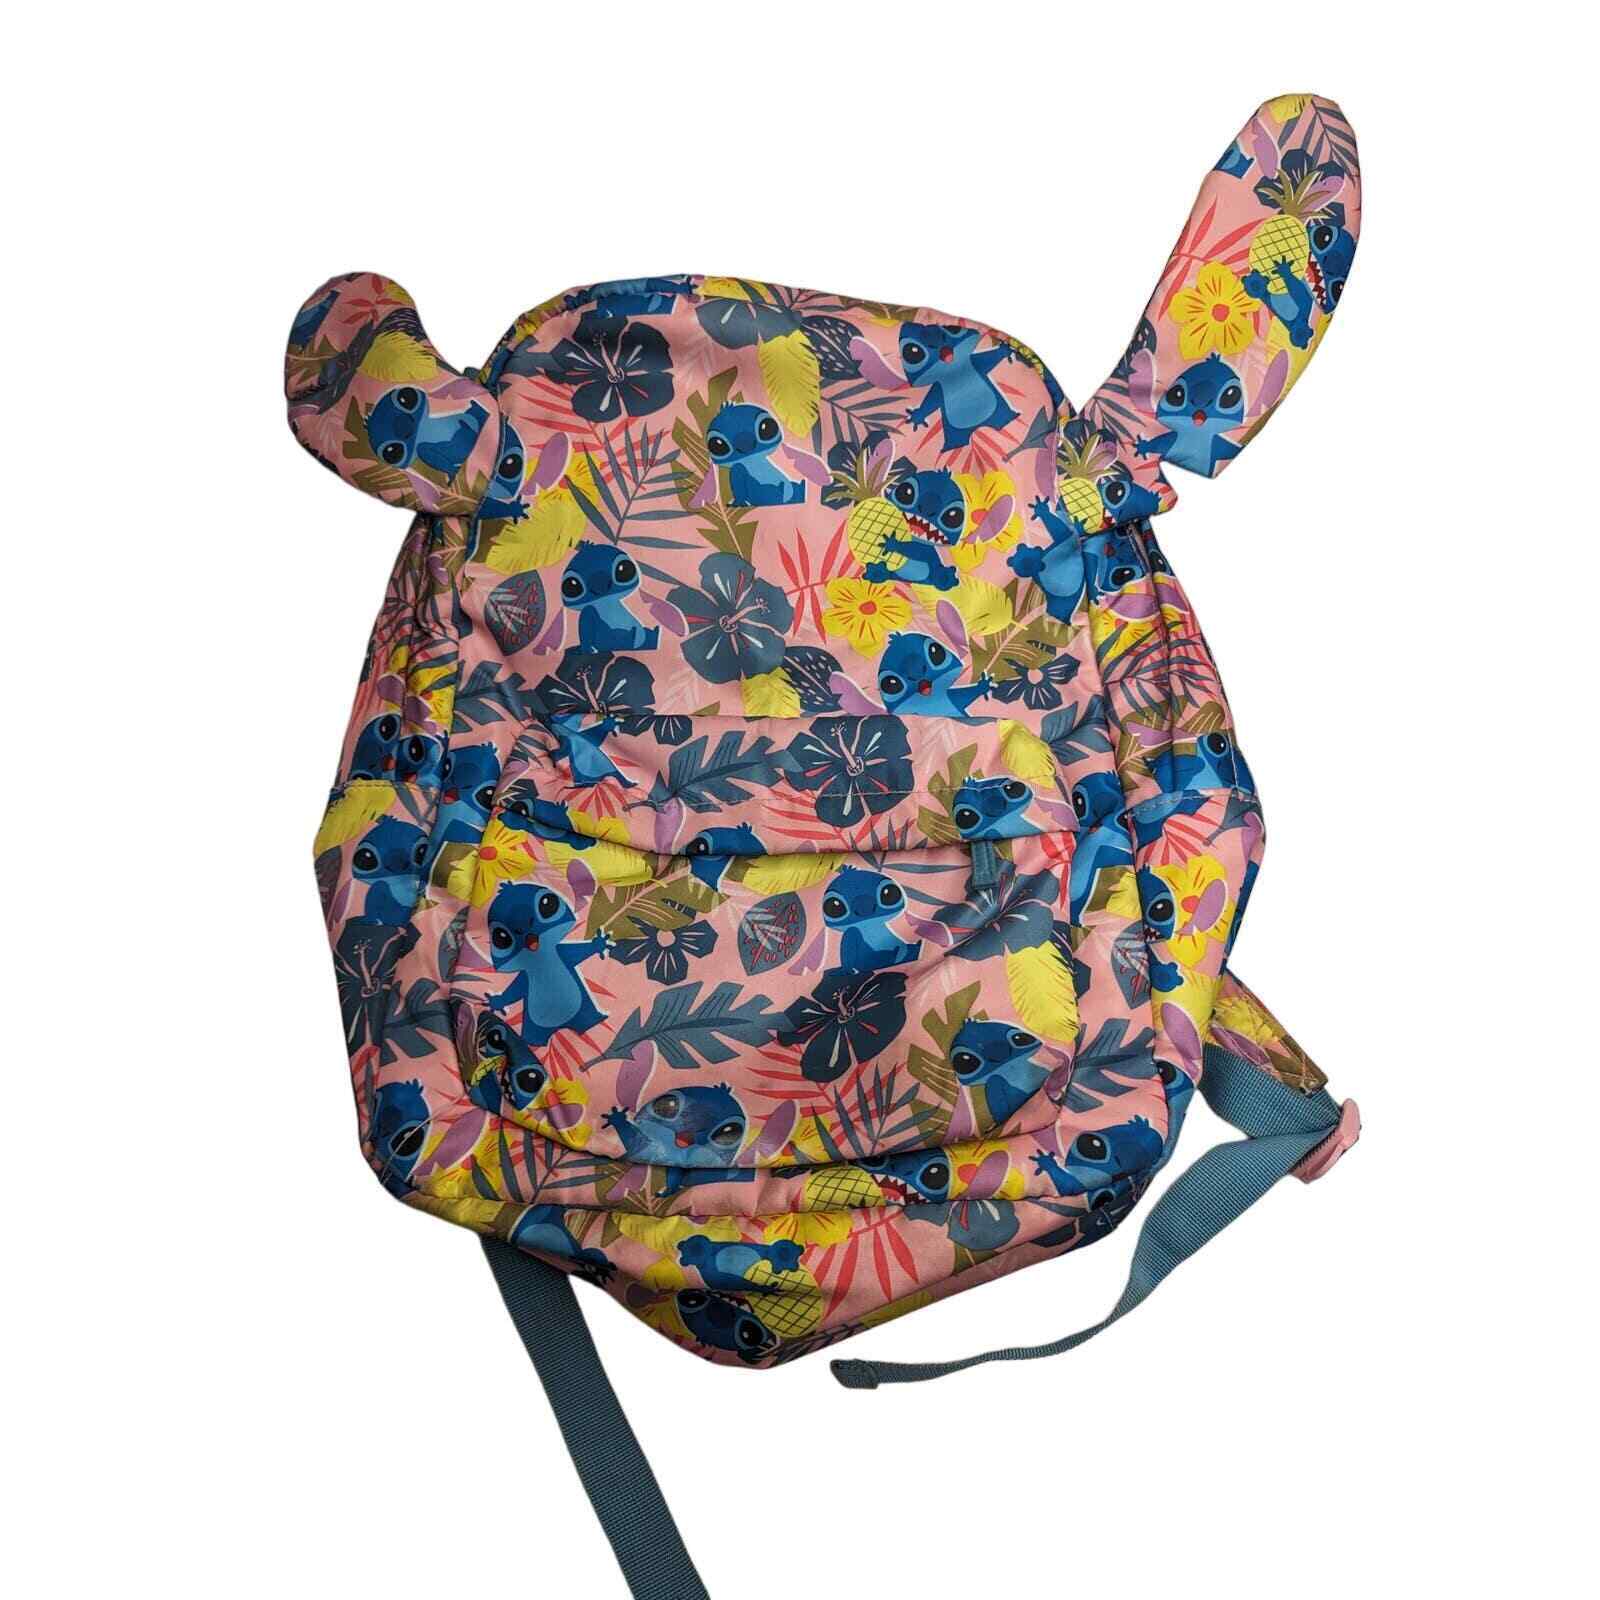 Rare Discontinued Disney Store Lilo and Stitch Backpack w/ Ears Pink Blue Floral